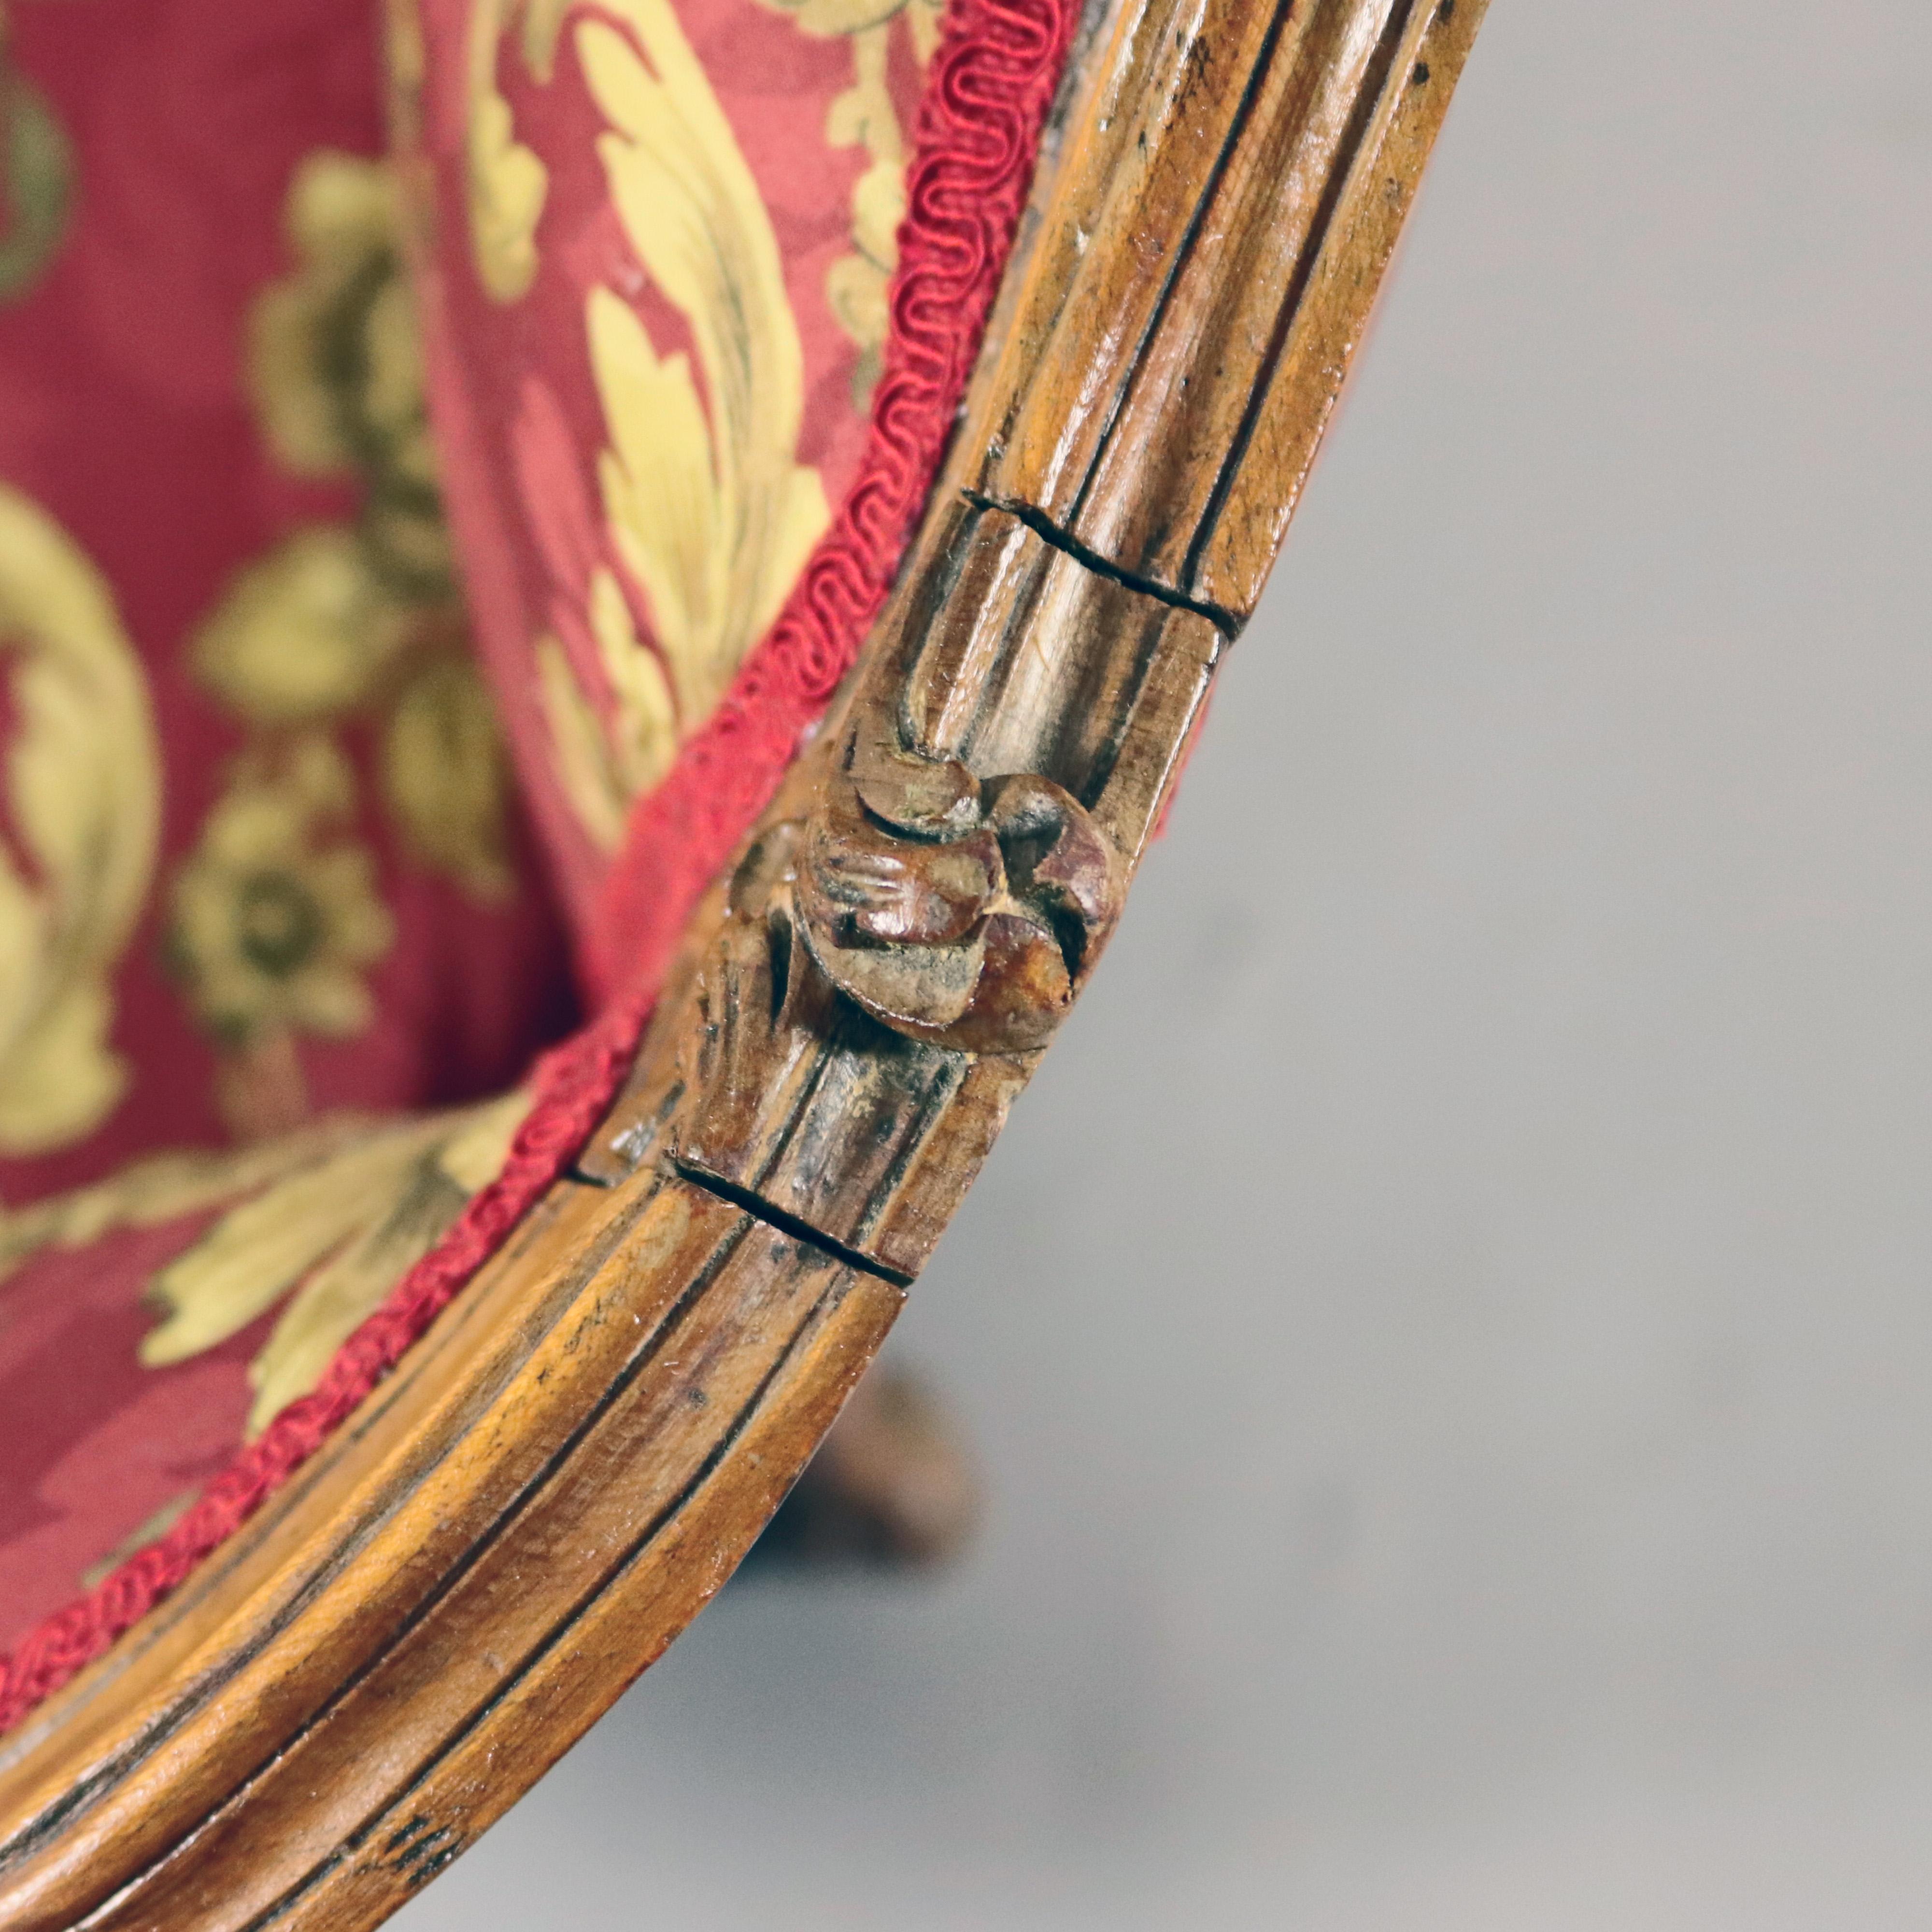 Upholstery Antique French Louis XV Carved Walnut French Bergère Armchair, 18th Century